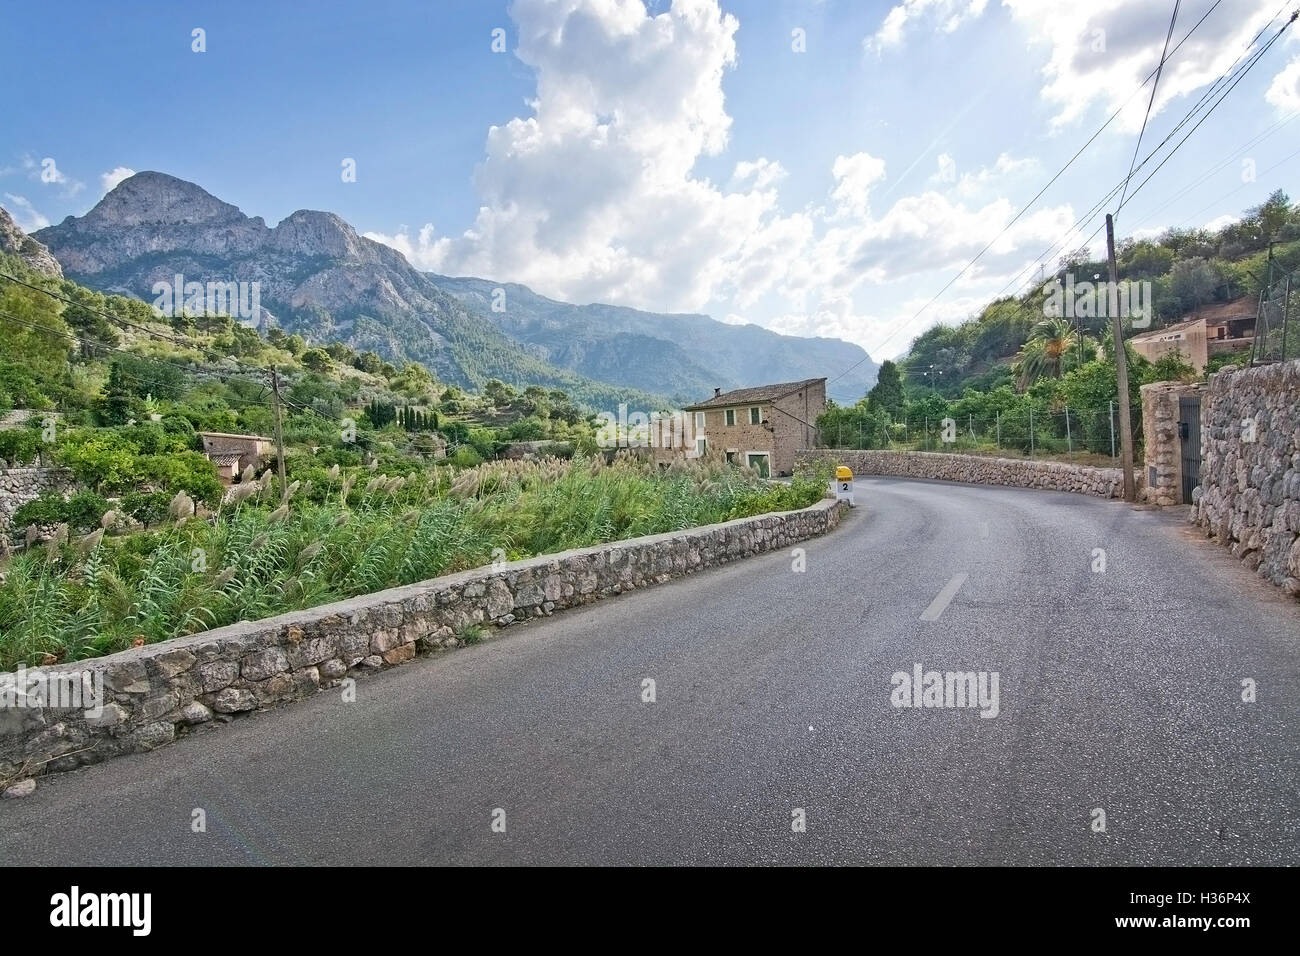 Mountain landscape with empty asphalted road in Fornalutx, Mallorca, Balearic islands, Spain. Stock Photo